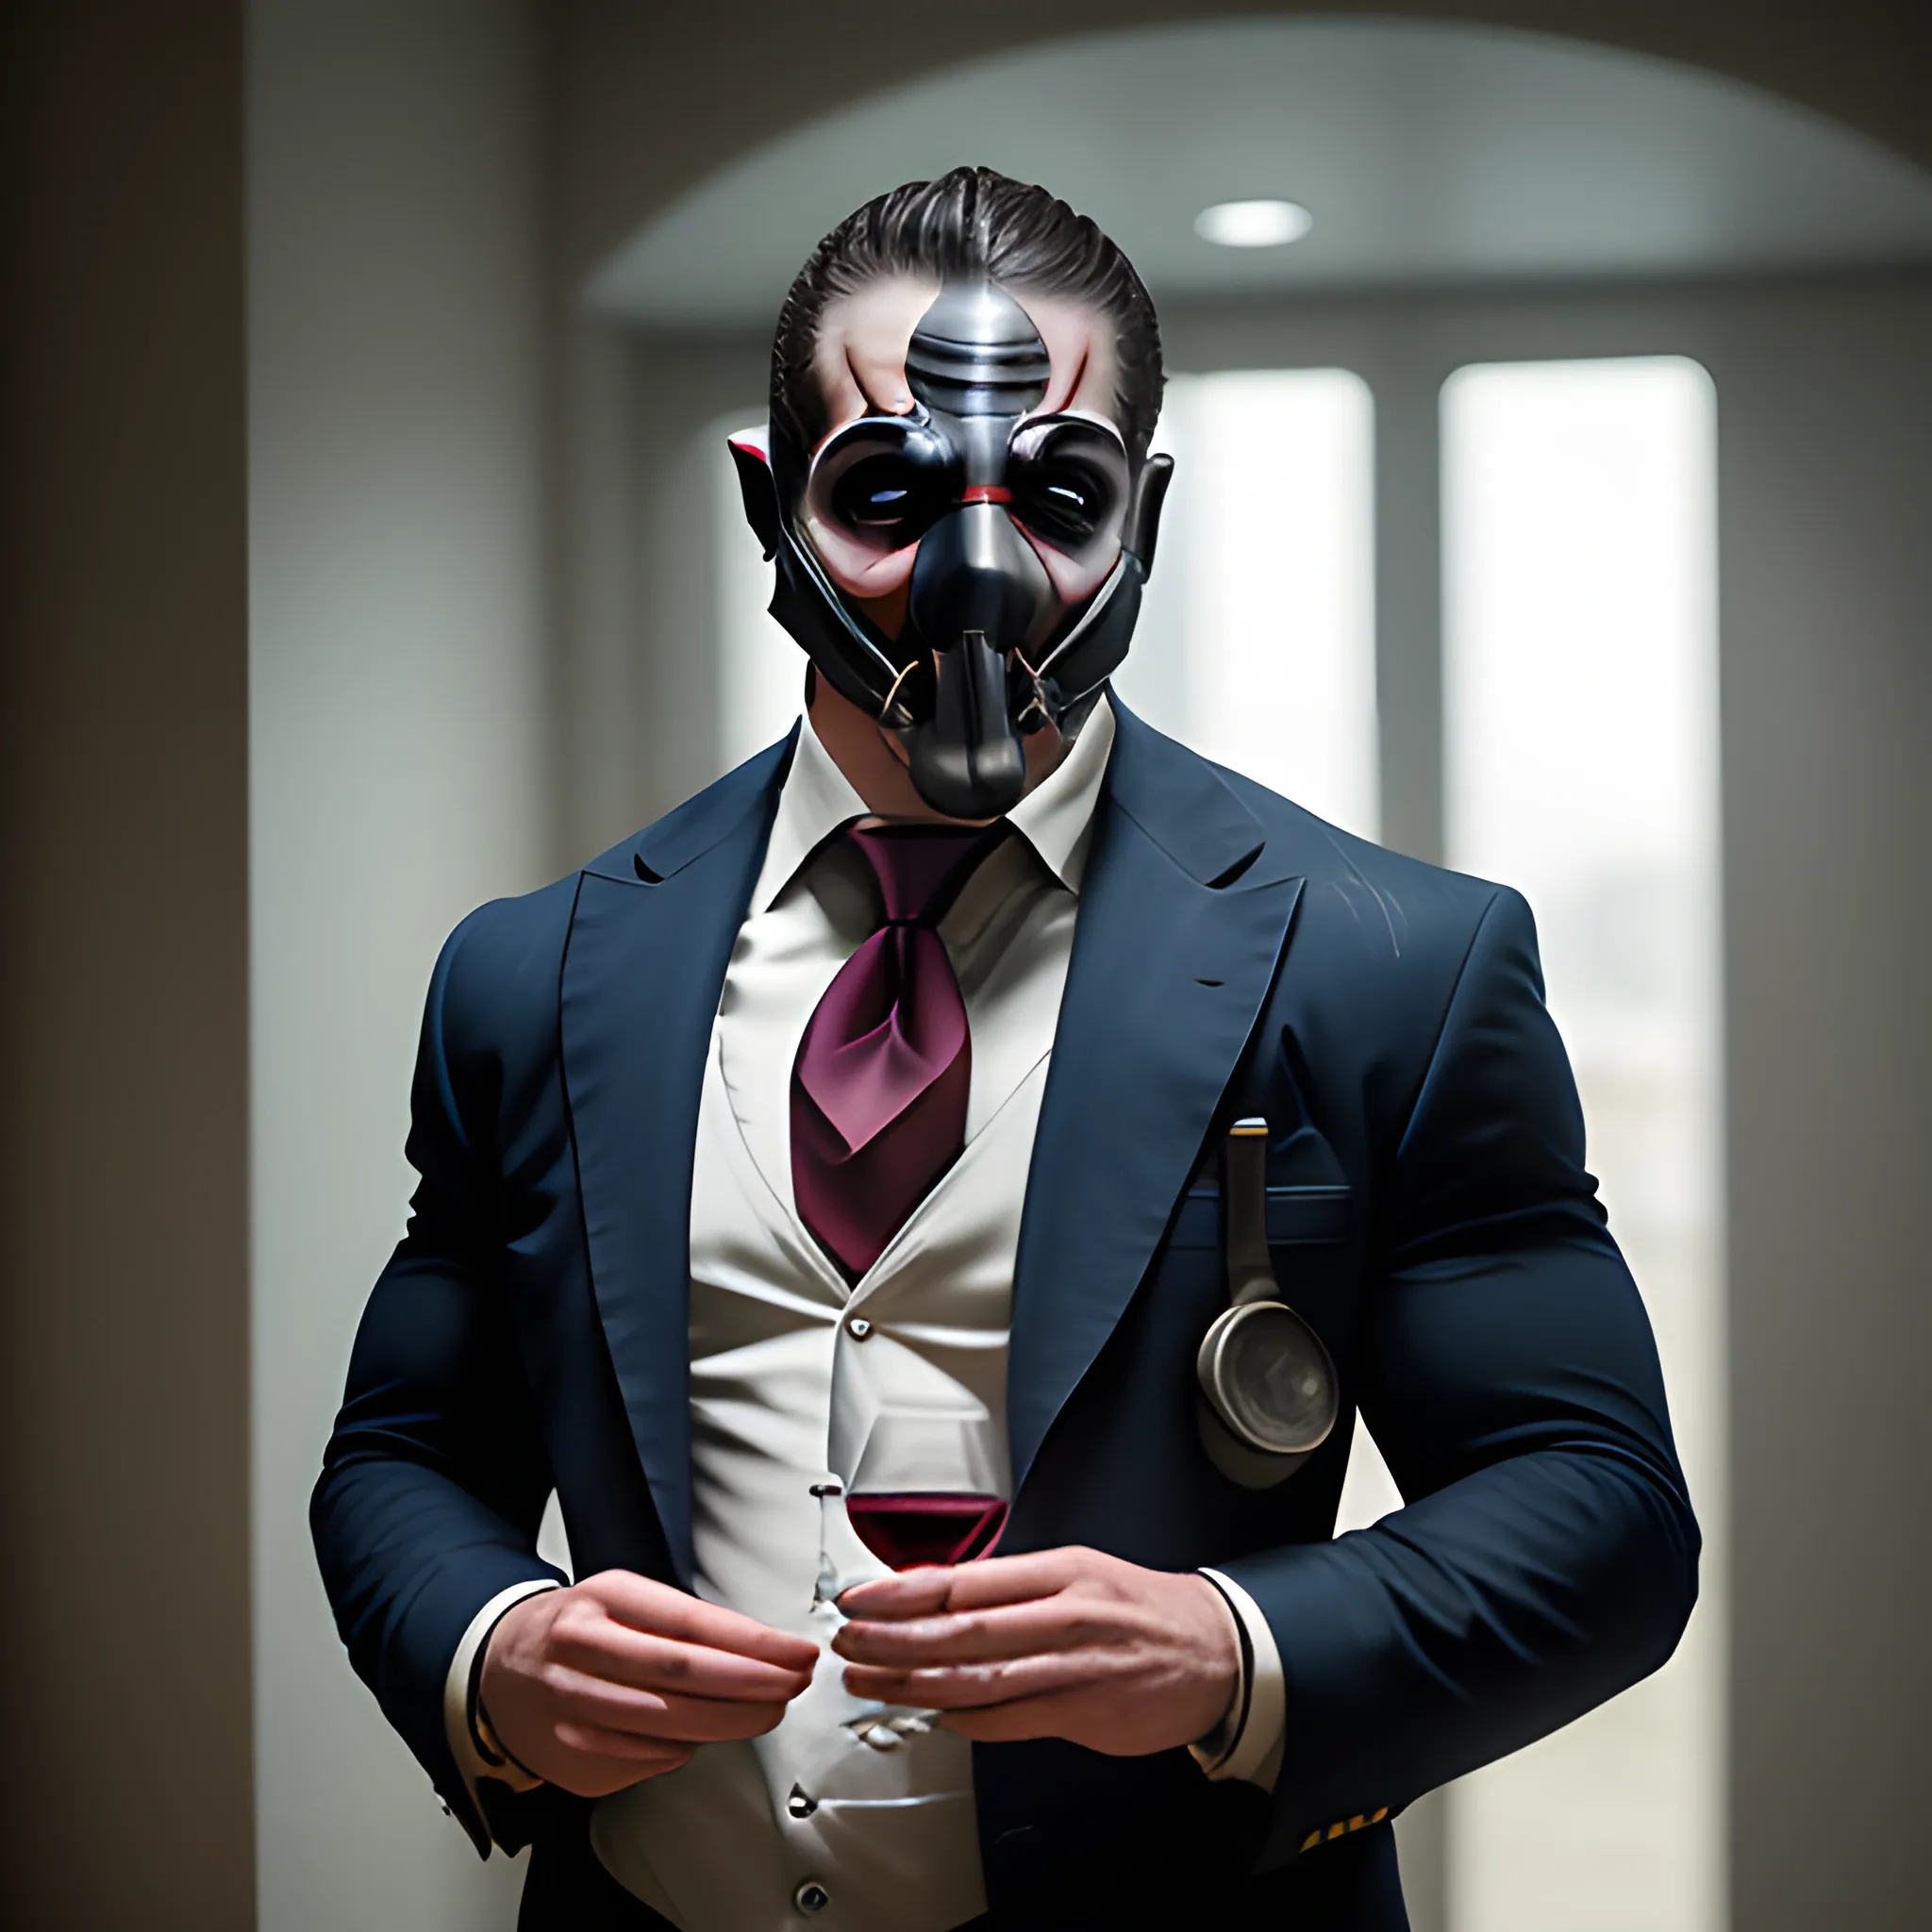 Ultra realistic photo of a sommelier like: (Bane: 1.3), with his face covered in a fine beard, (muscular body: 1.3). He is wearing a navy blue Armany suit. with a red tie. holding a glass of red wine in her hands, Cinematic sense, light colors, Style:
Hyperrealistic photography. Camera: Kodak 35mm 1.33:1 aspect ratio.
5D Mark IV DSLR, camera setup:
Aperture f/ 5.6, Shutter speed of.
1/125 second, ISO 100, -ar 2:3
, shot with Afga Vista 400,
backlight -9:16.
cinematographic sense,